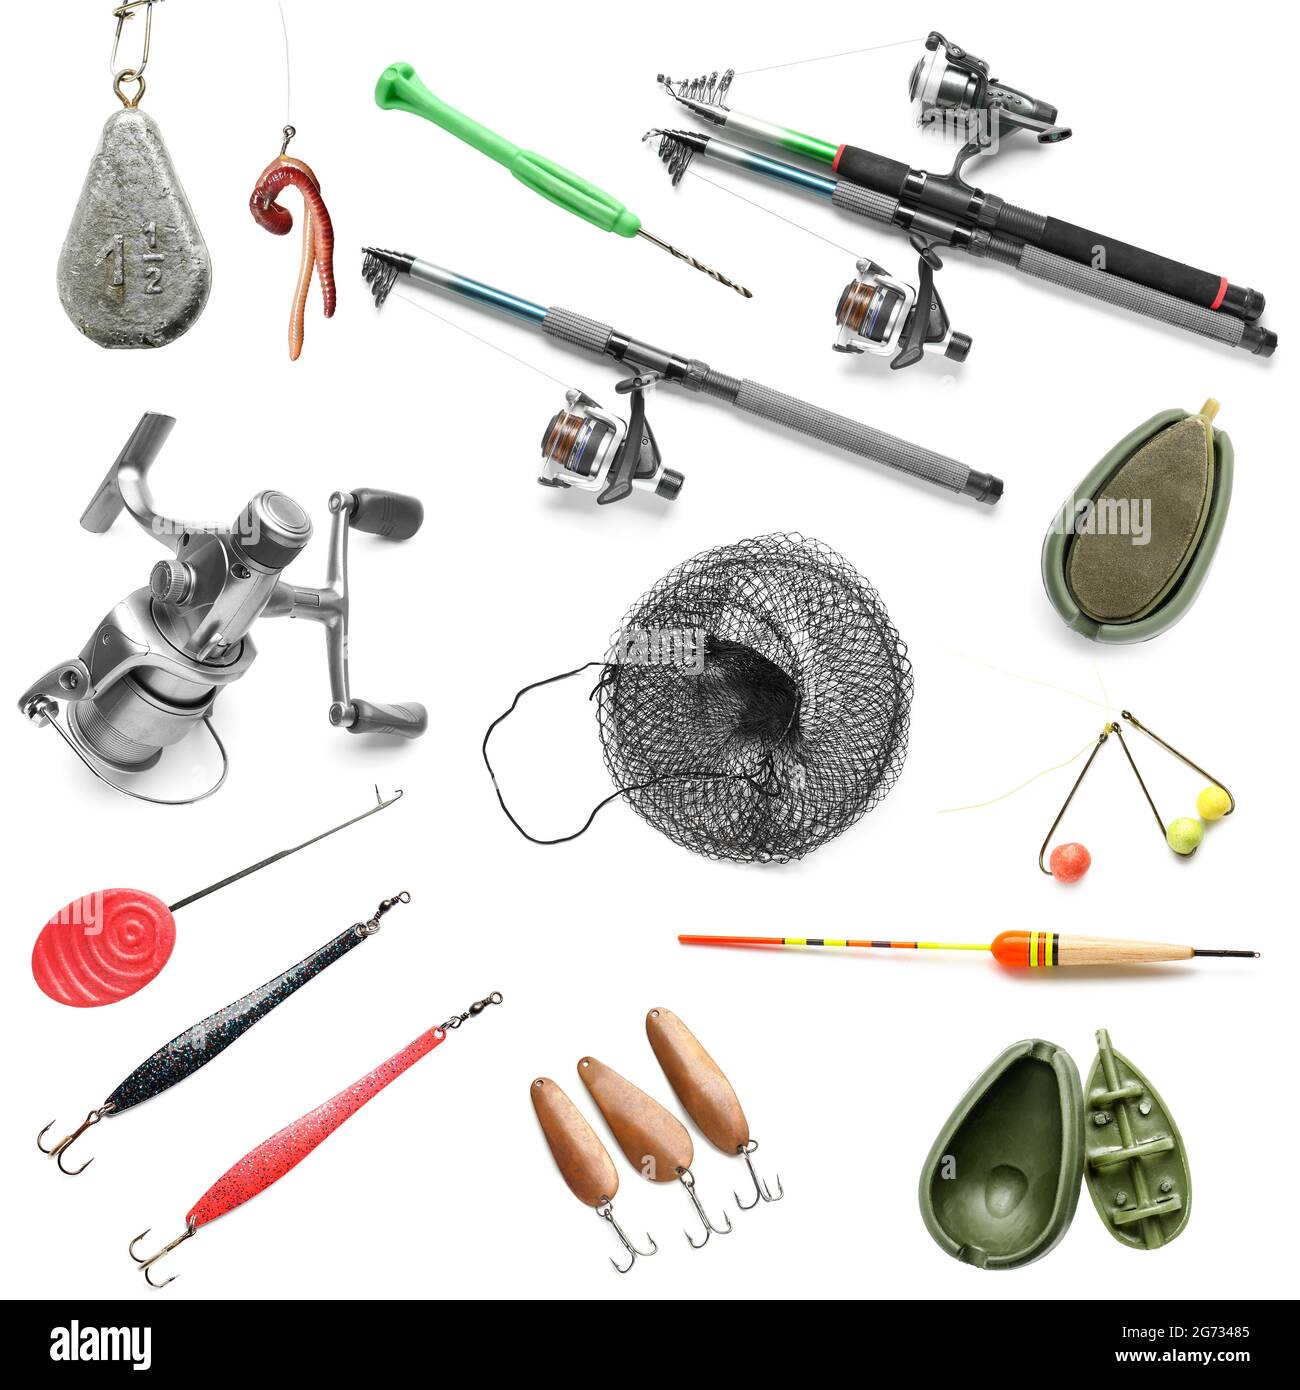 Fishing supplies Cut Out Stock Images & Pictures - Alamy